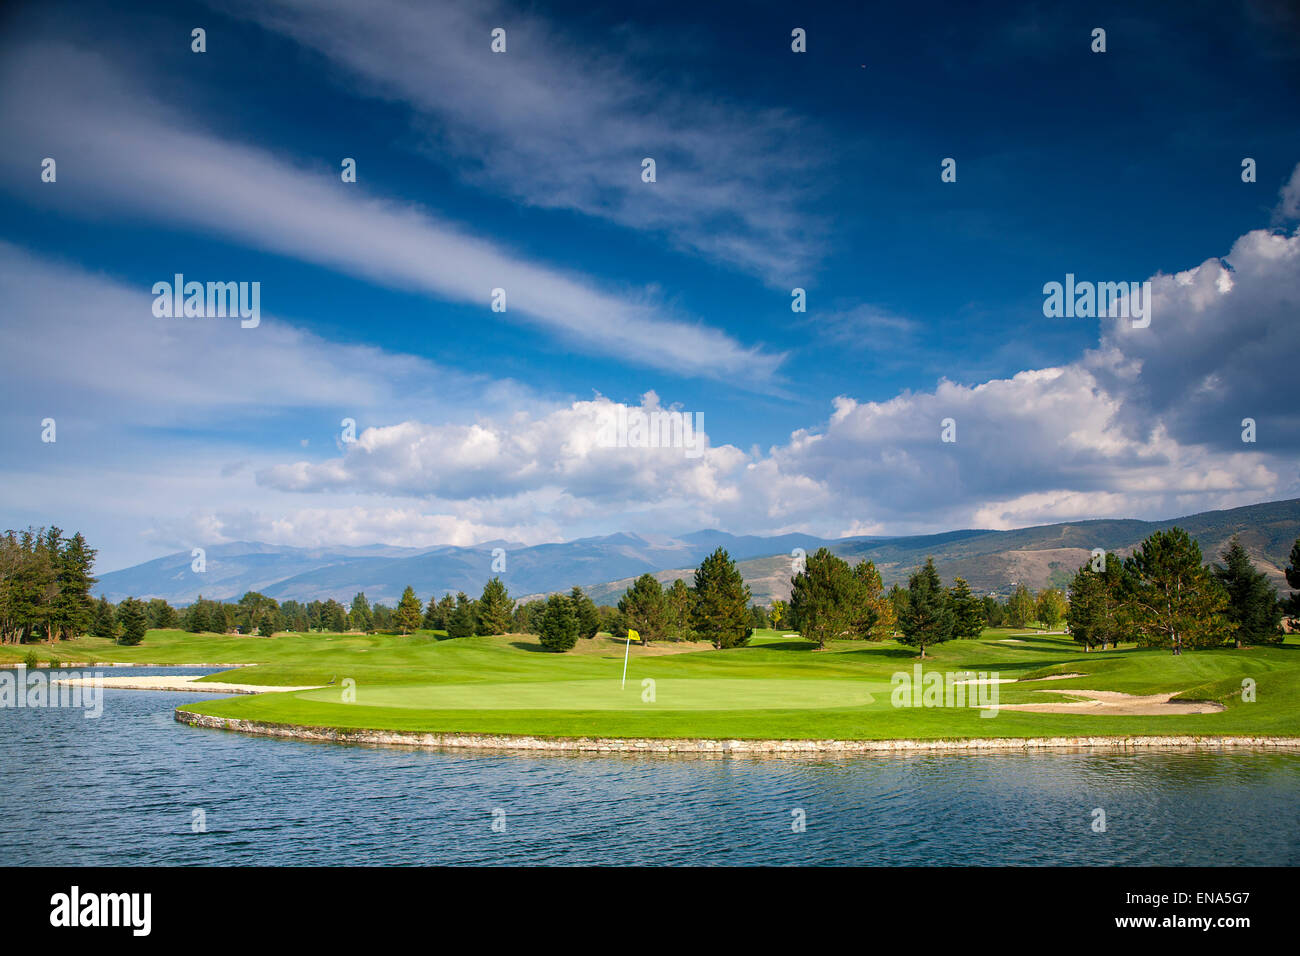 Fontanals Golf Club - amazing golf course with lake mountains and blue sky. Stock Photo